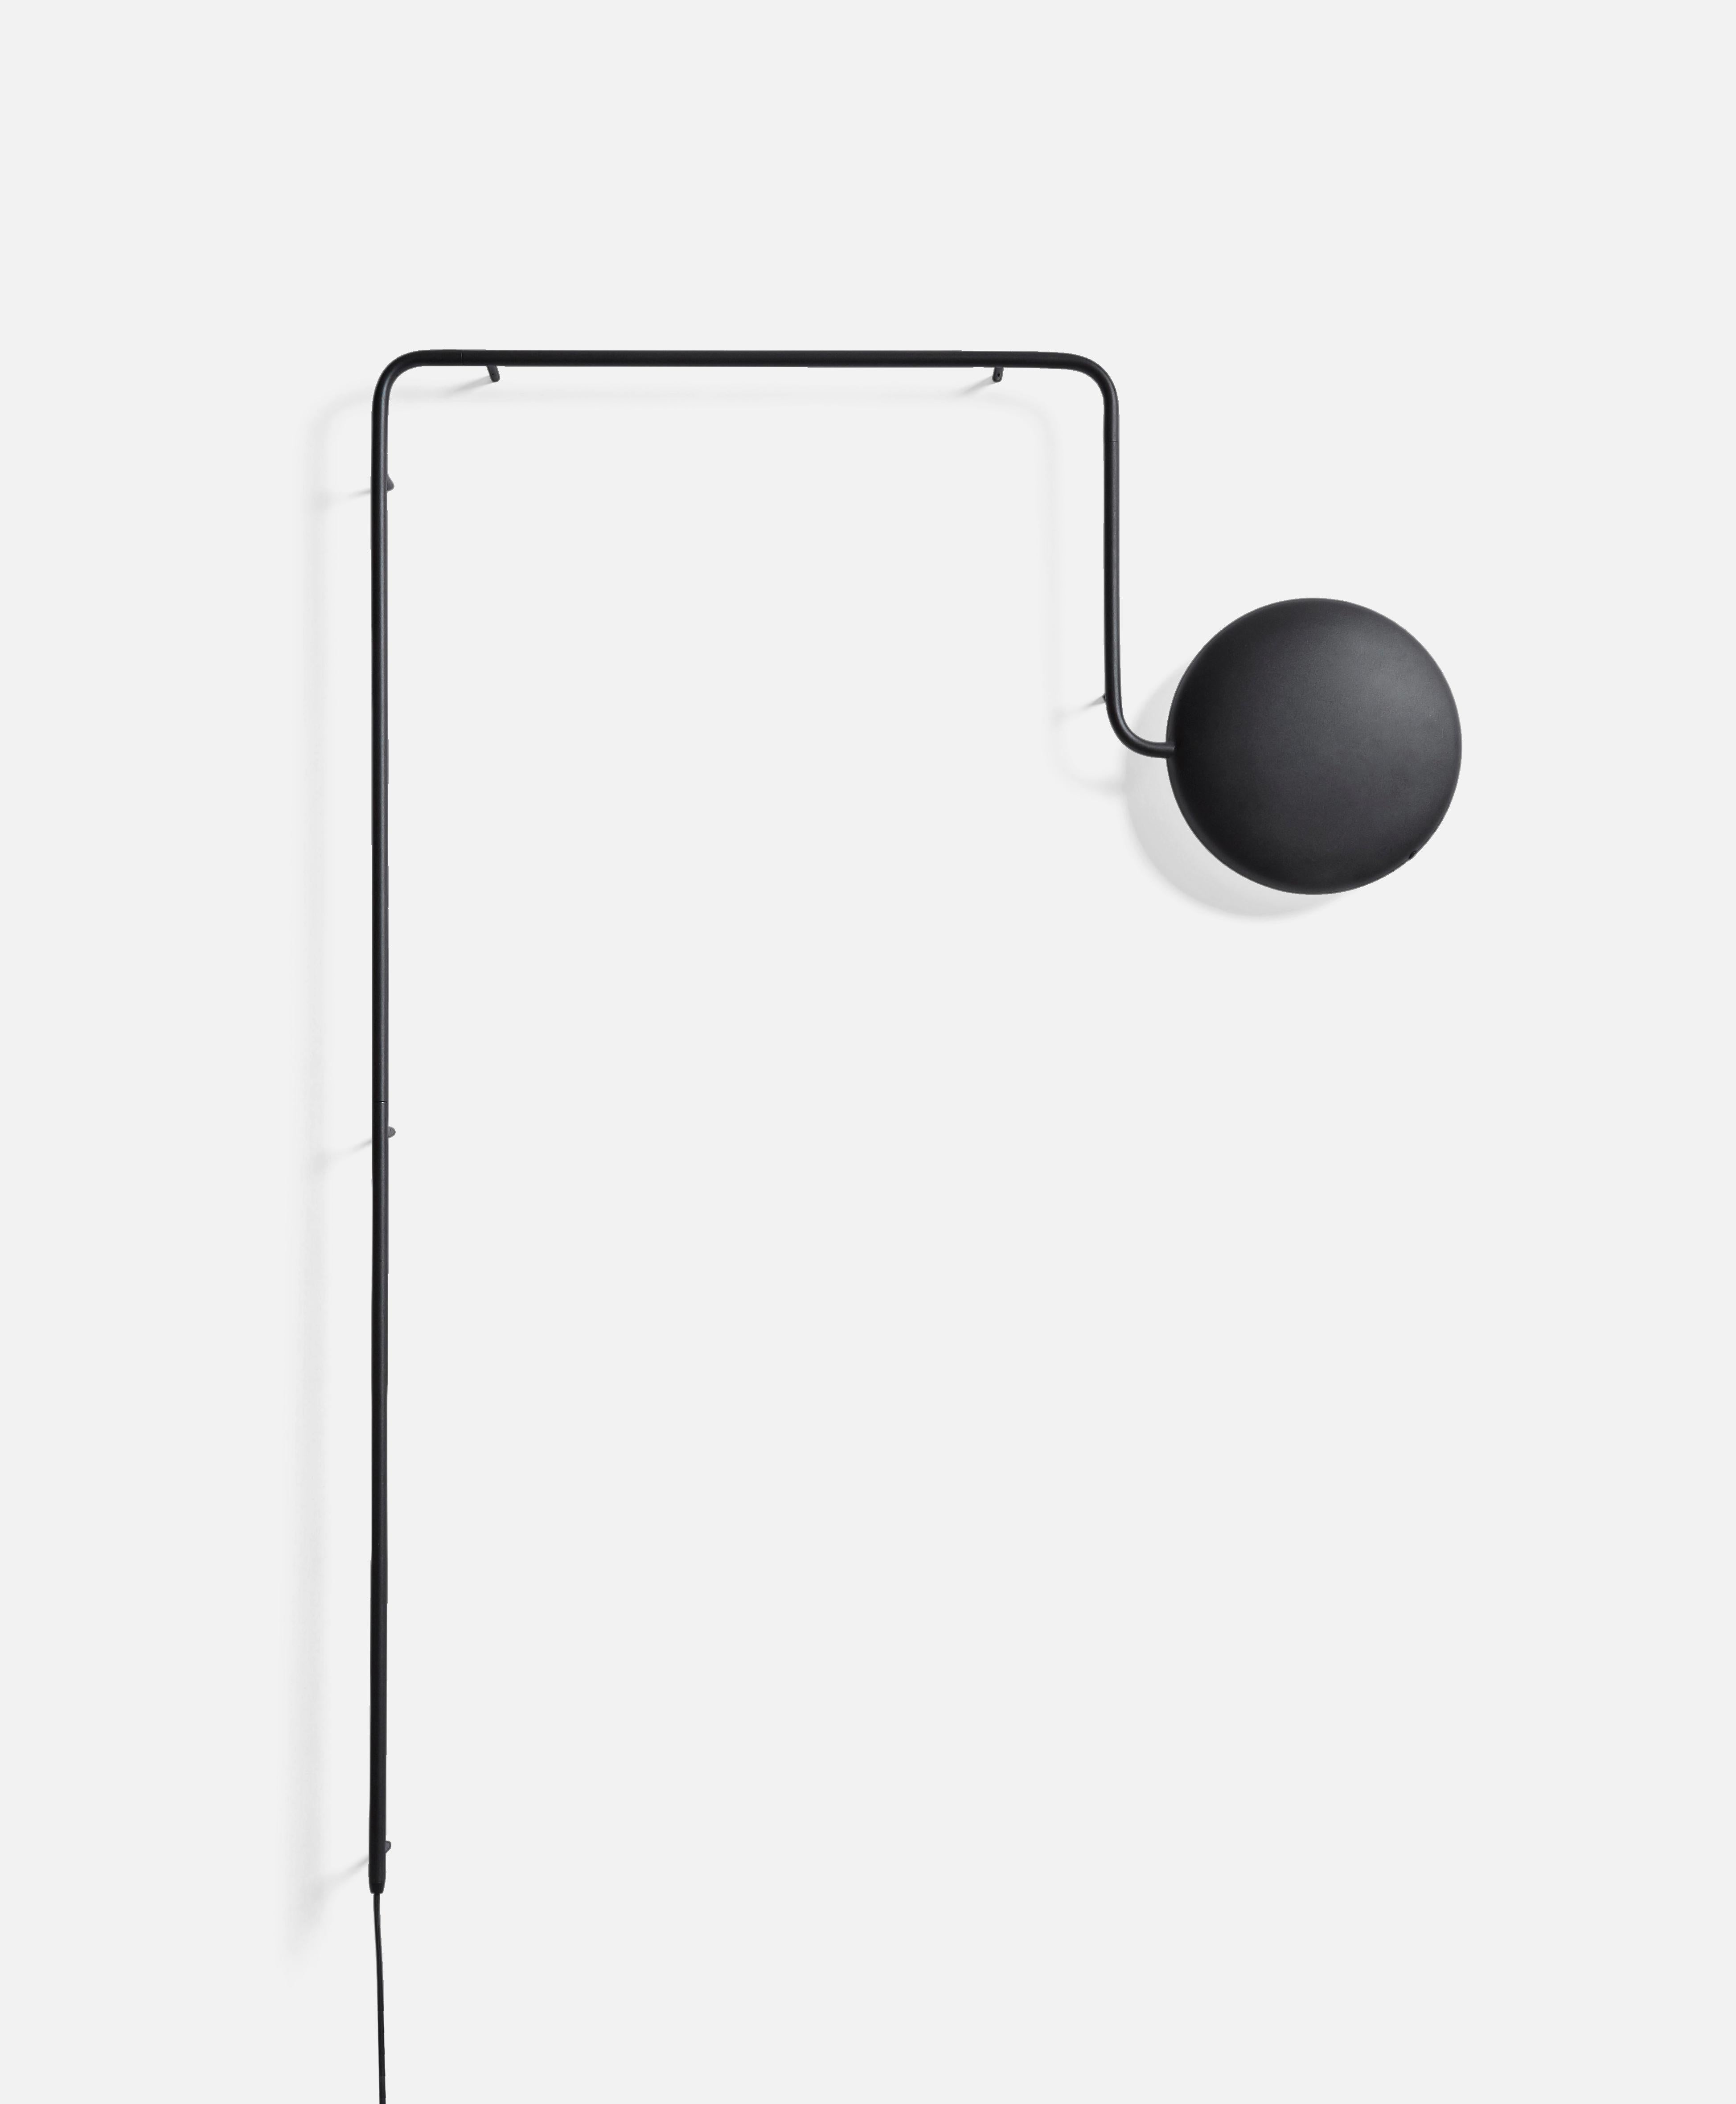 Mercury wall lamp by Jeanette Holdgaard.
Materials: Metal.
Dimensions: D 8 x W 109.7 x H 152.1 cm.

Jeanette Holdgaard is a talented Danish designer. She graduated from VIA University College with a Bachelor specialising in Design and Furniture.